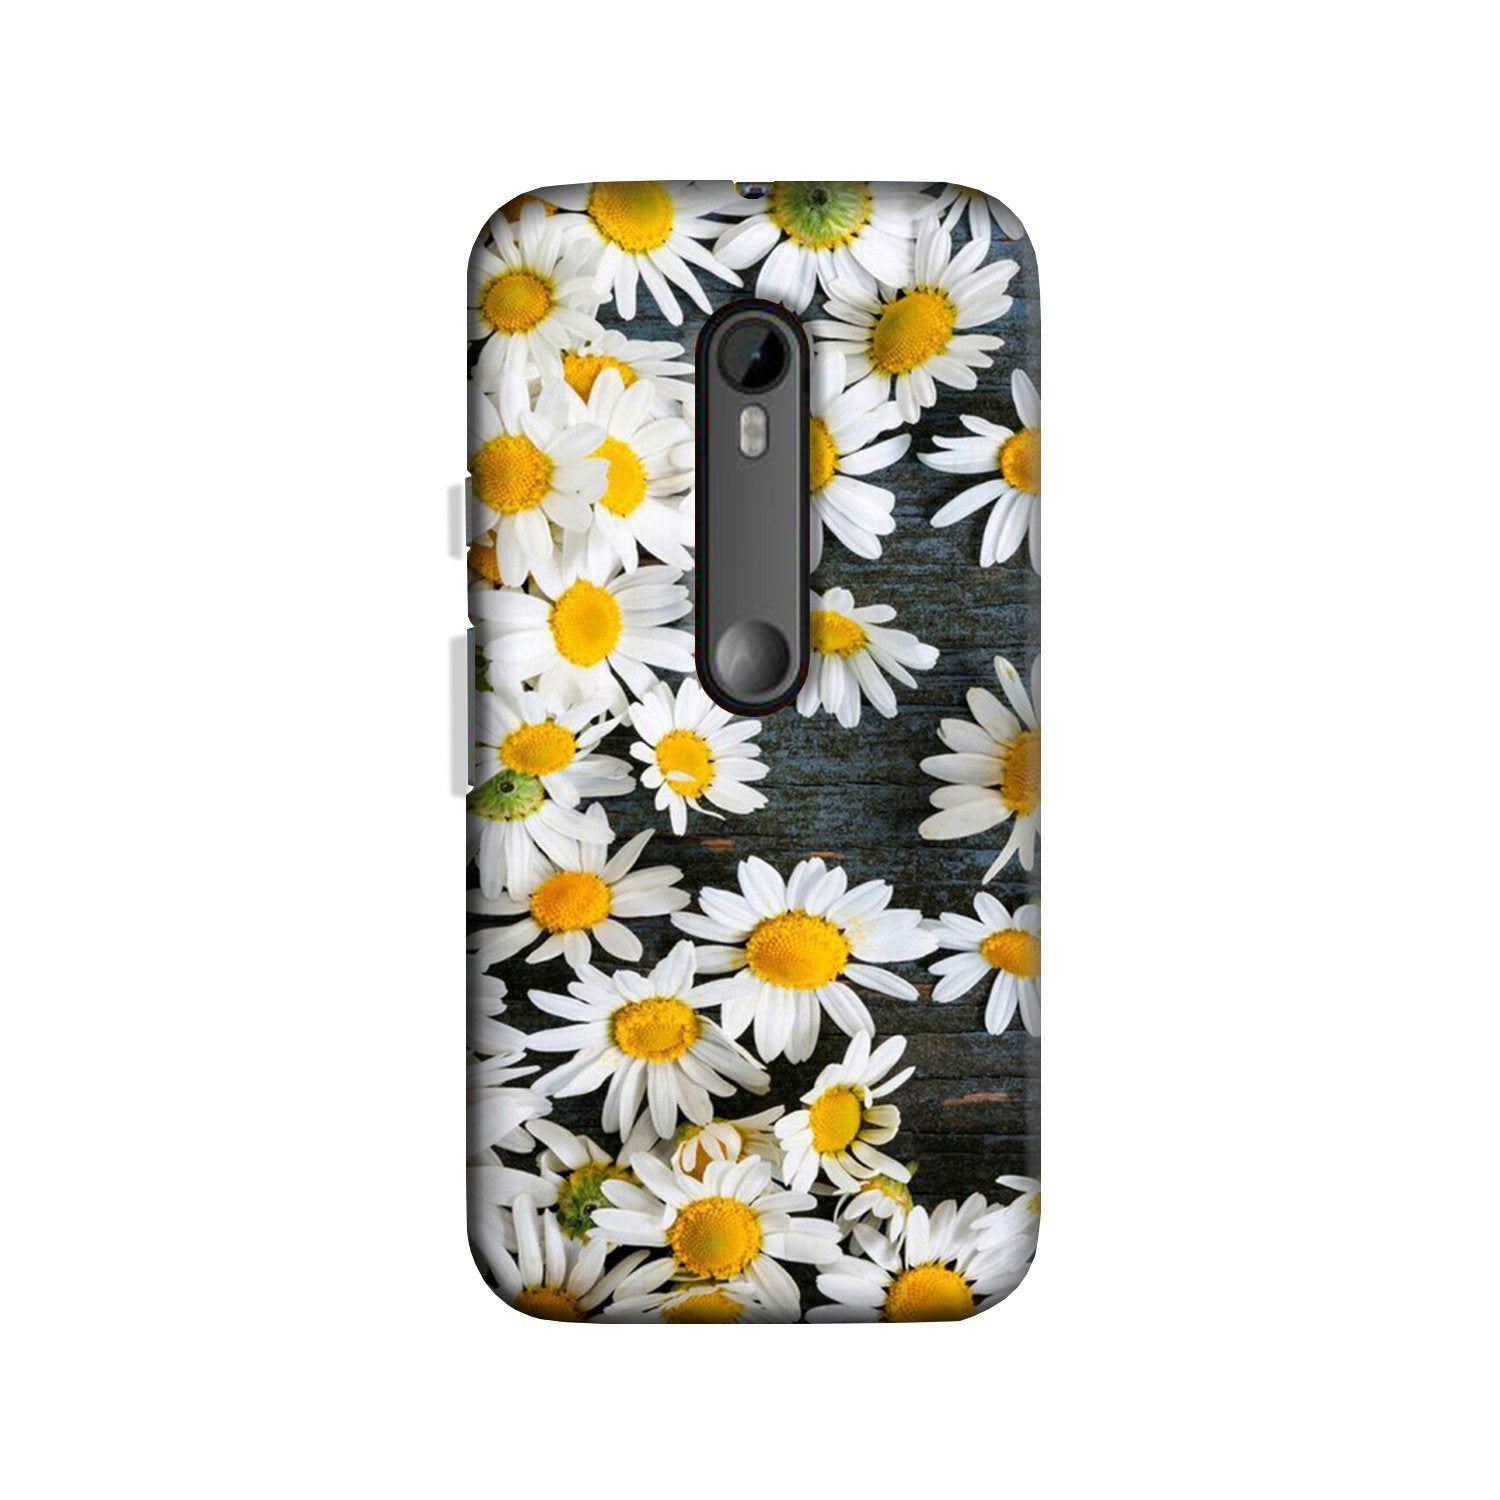 White flowers2 Case for Moto X Play